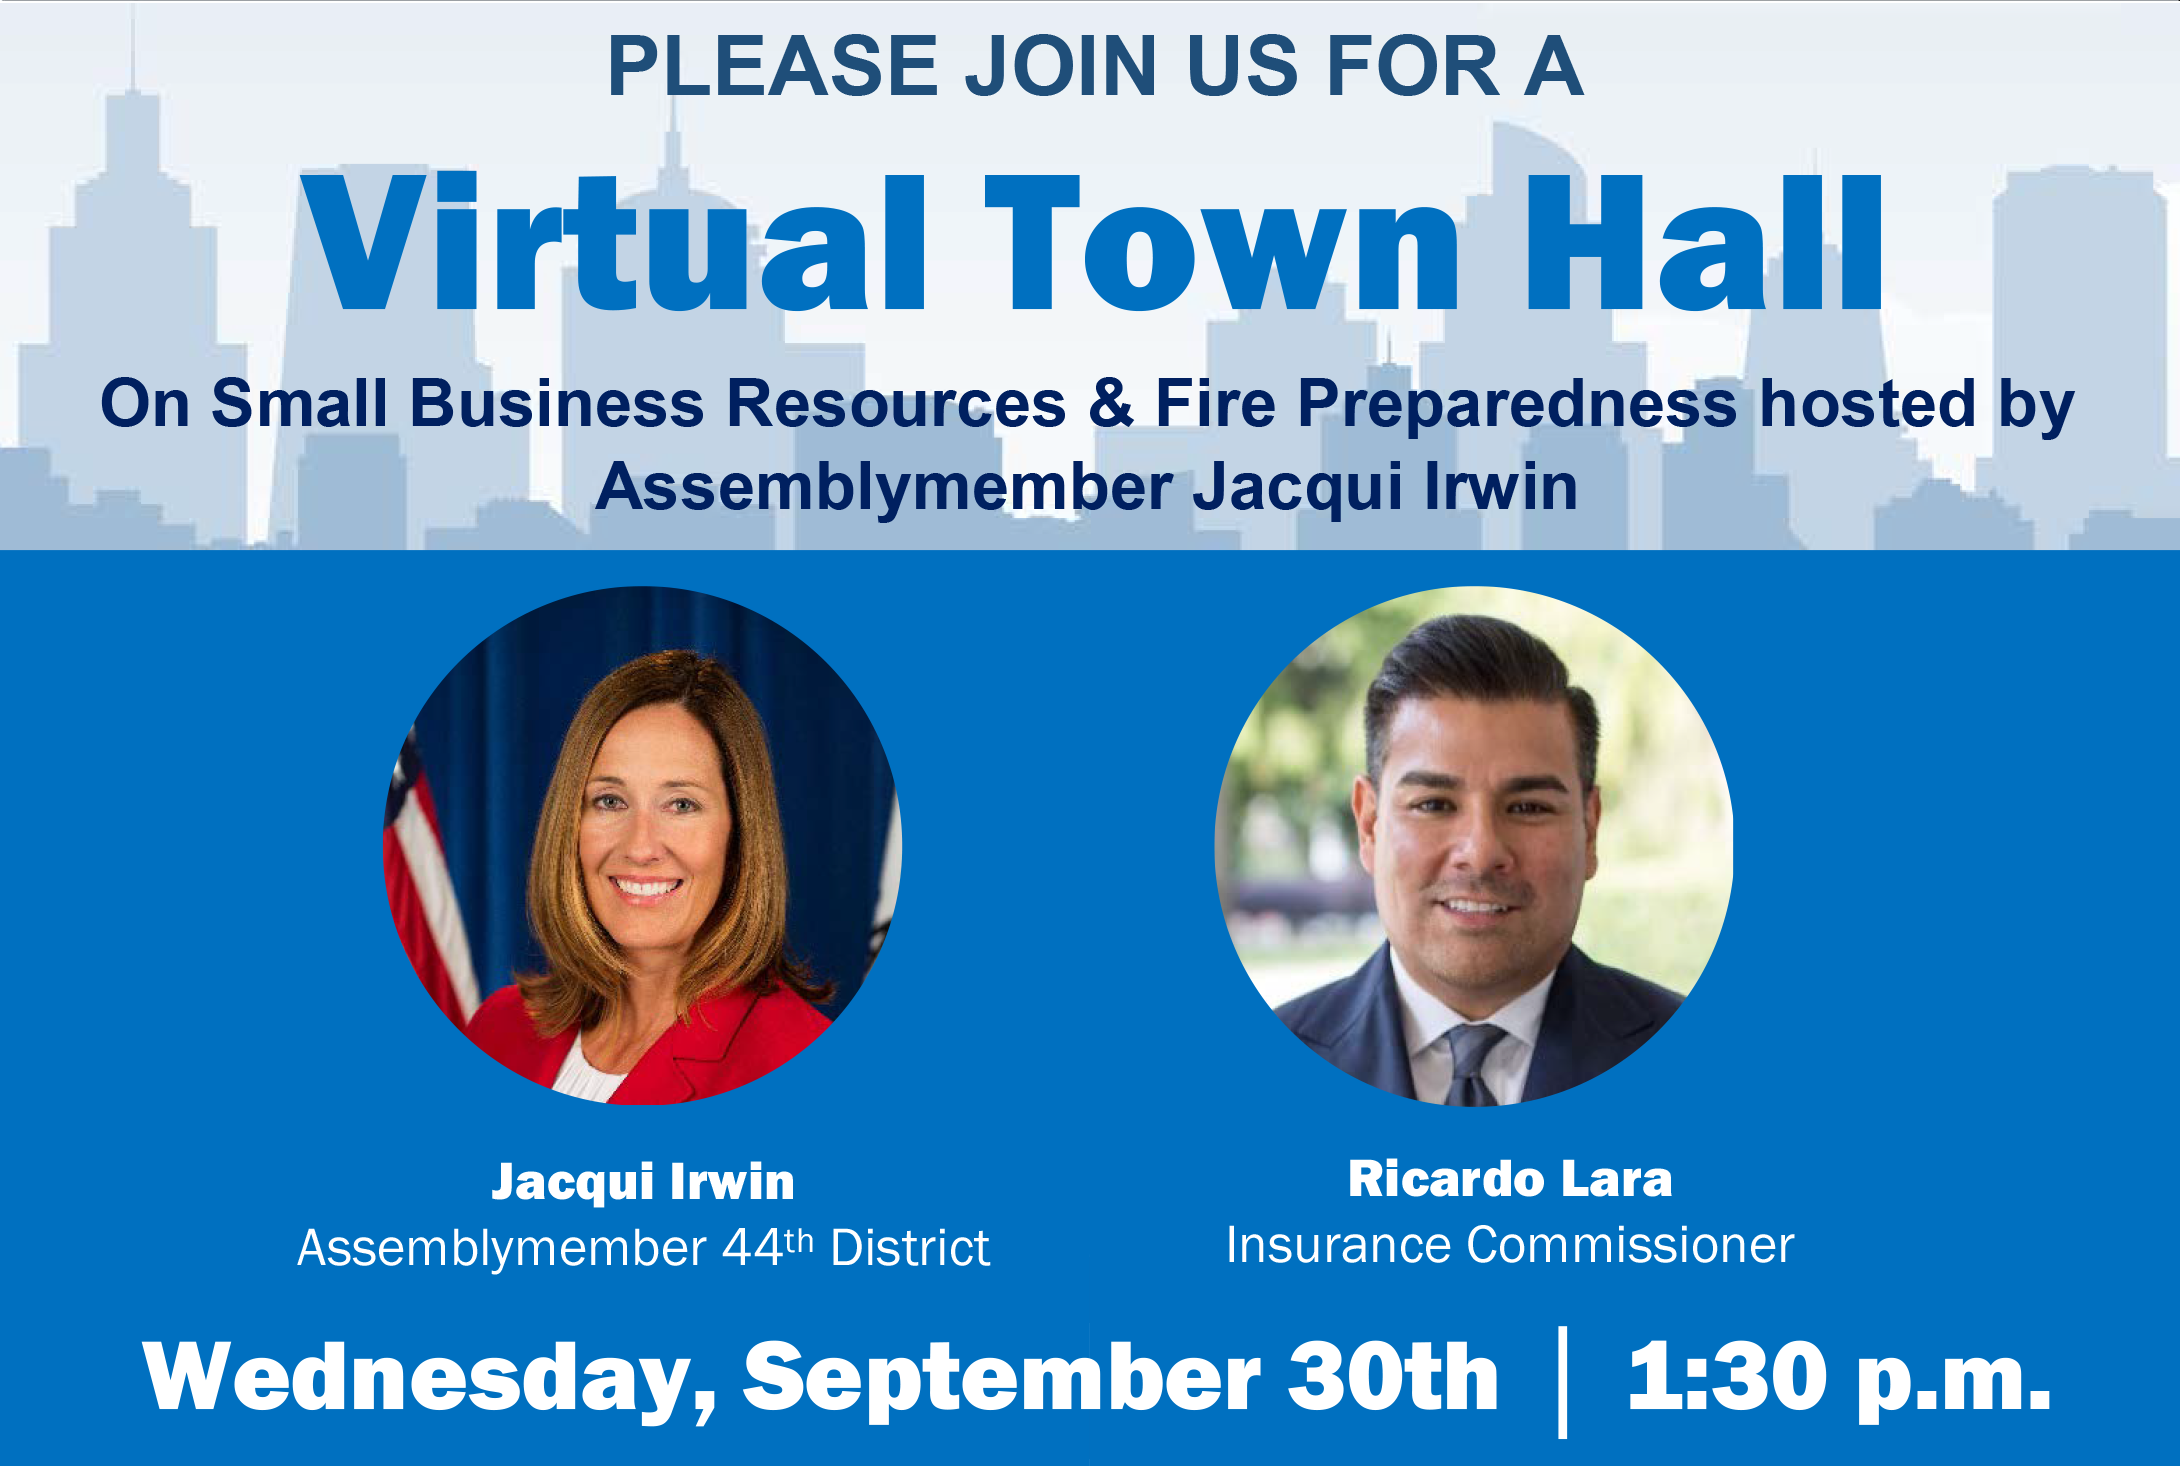 PLEASE JOIN US FOR A  Virtual Town Hall  On Small Business Resources &amp; Fire Preparedness with commissioner Ricardo Lara and hosted by Assemblymember Jacqui Irwin  Wednesday, September 30th, 1:30 p.m.